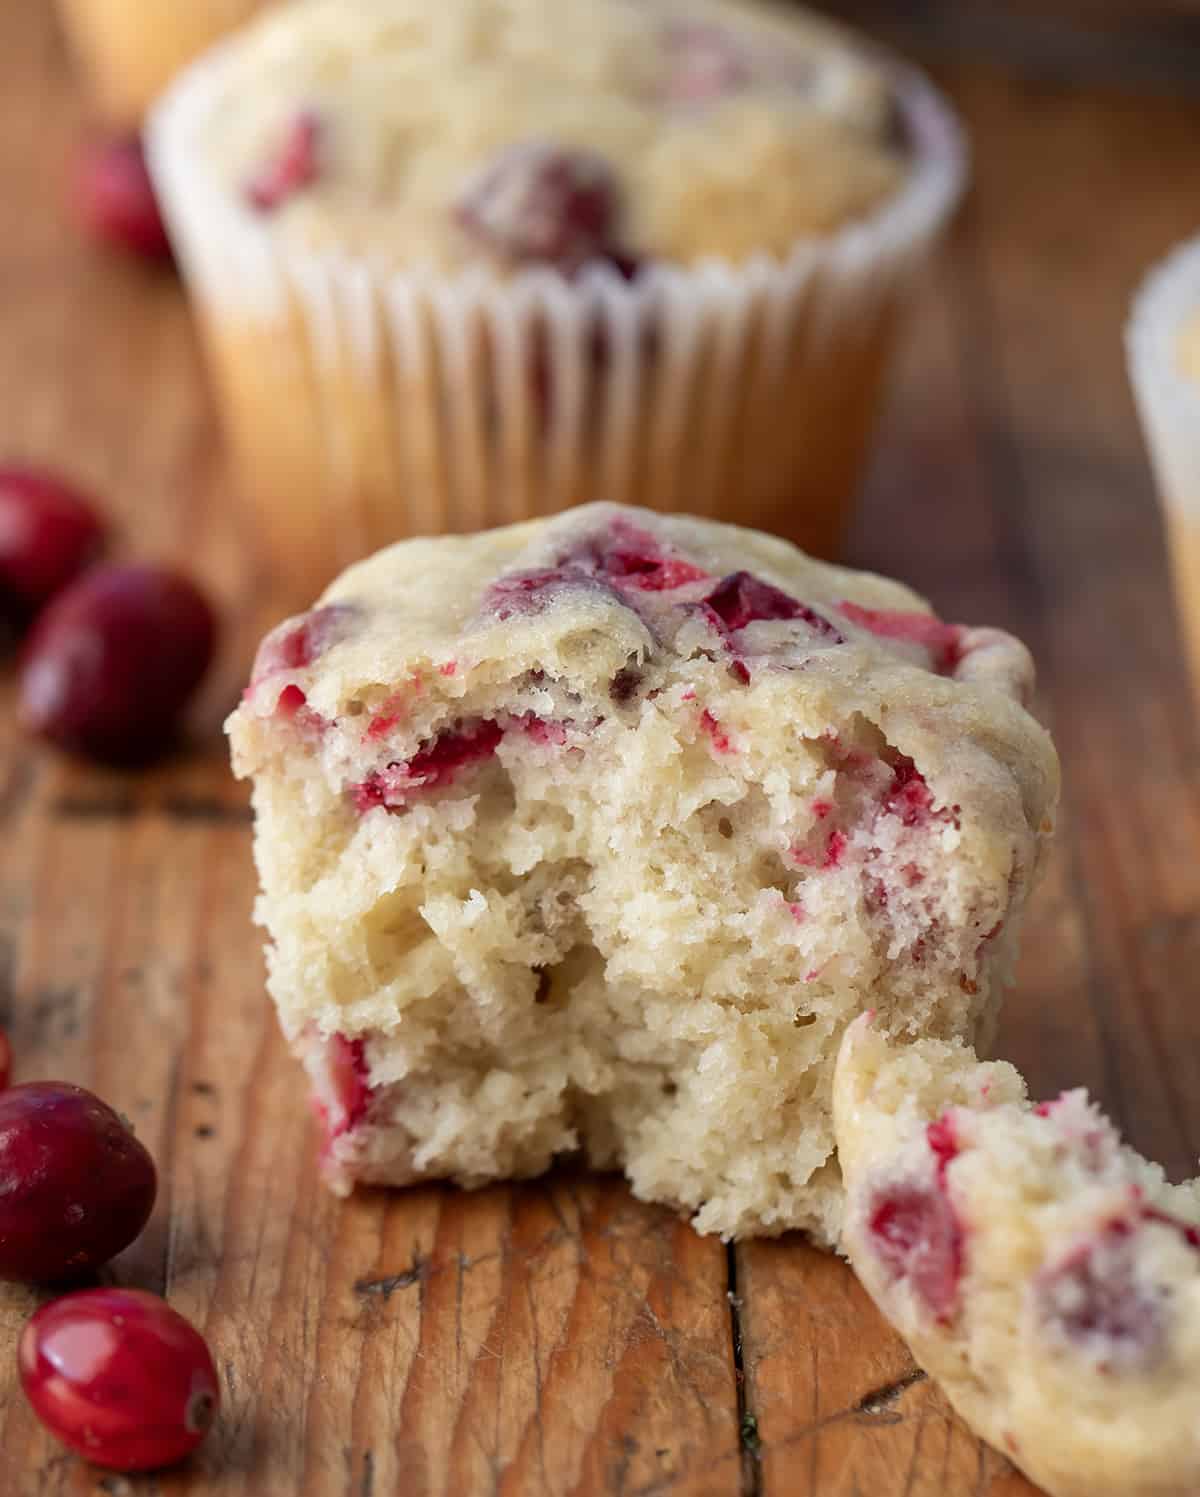 Cranberry Banana Muffin halved showing tender crumb inside.